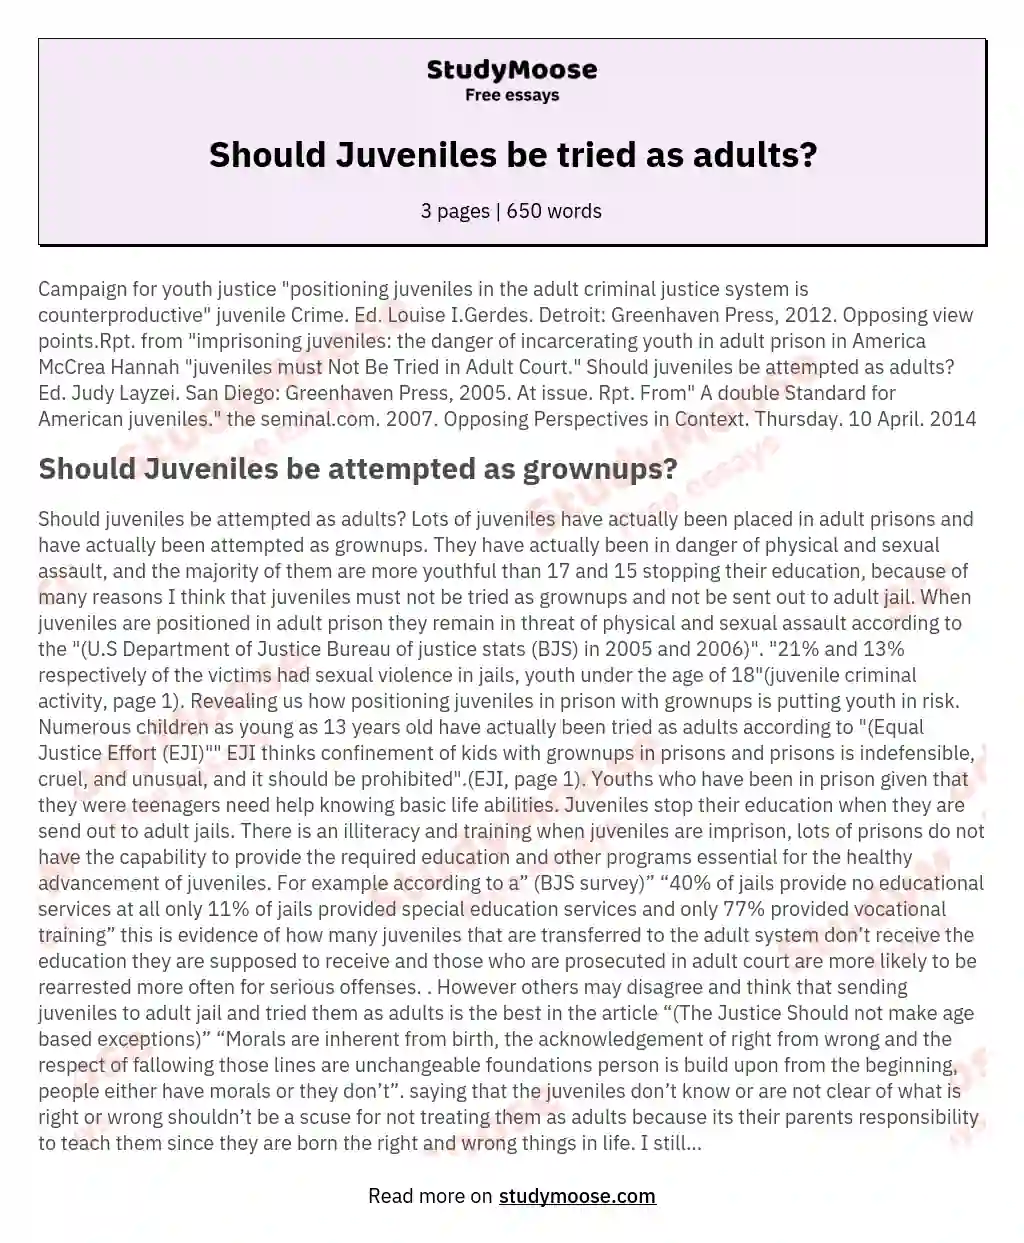 Should Juveniles be tried as adults?